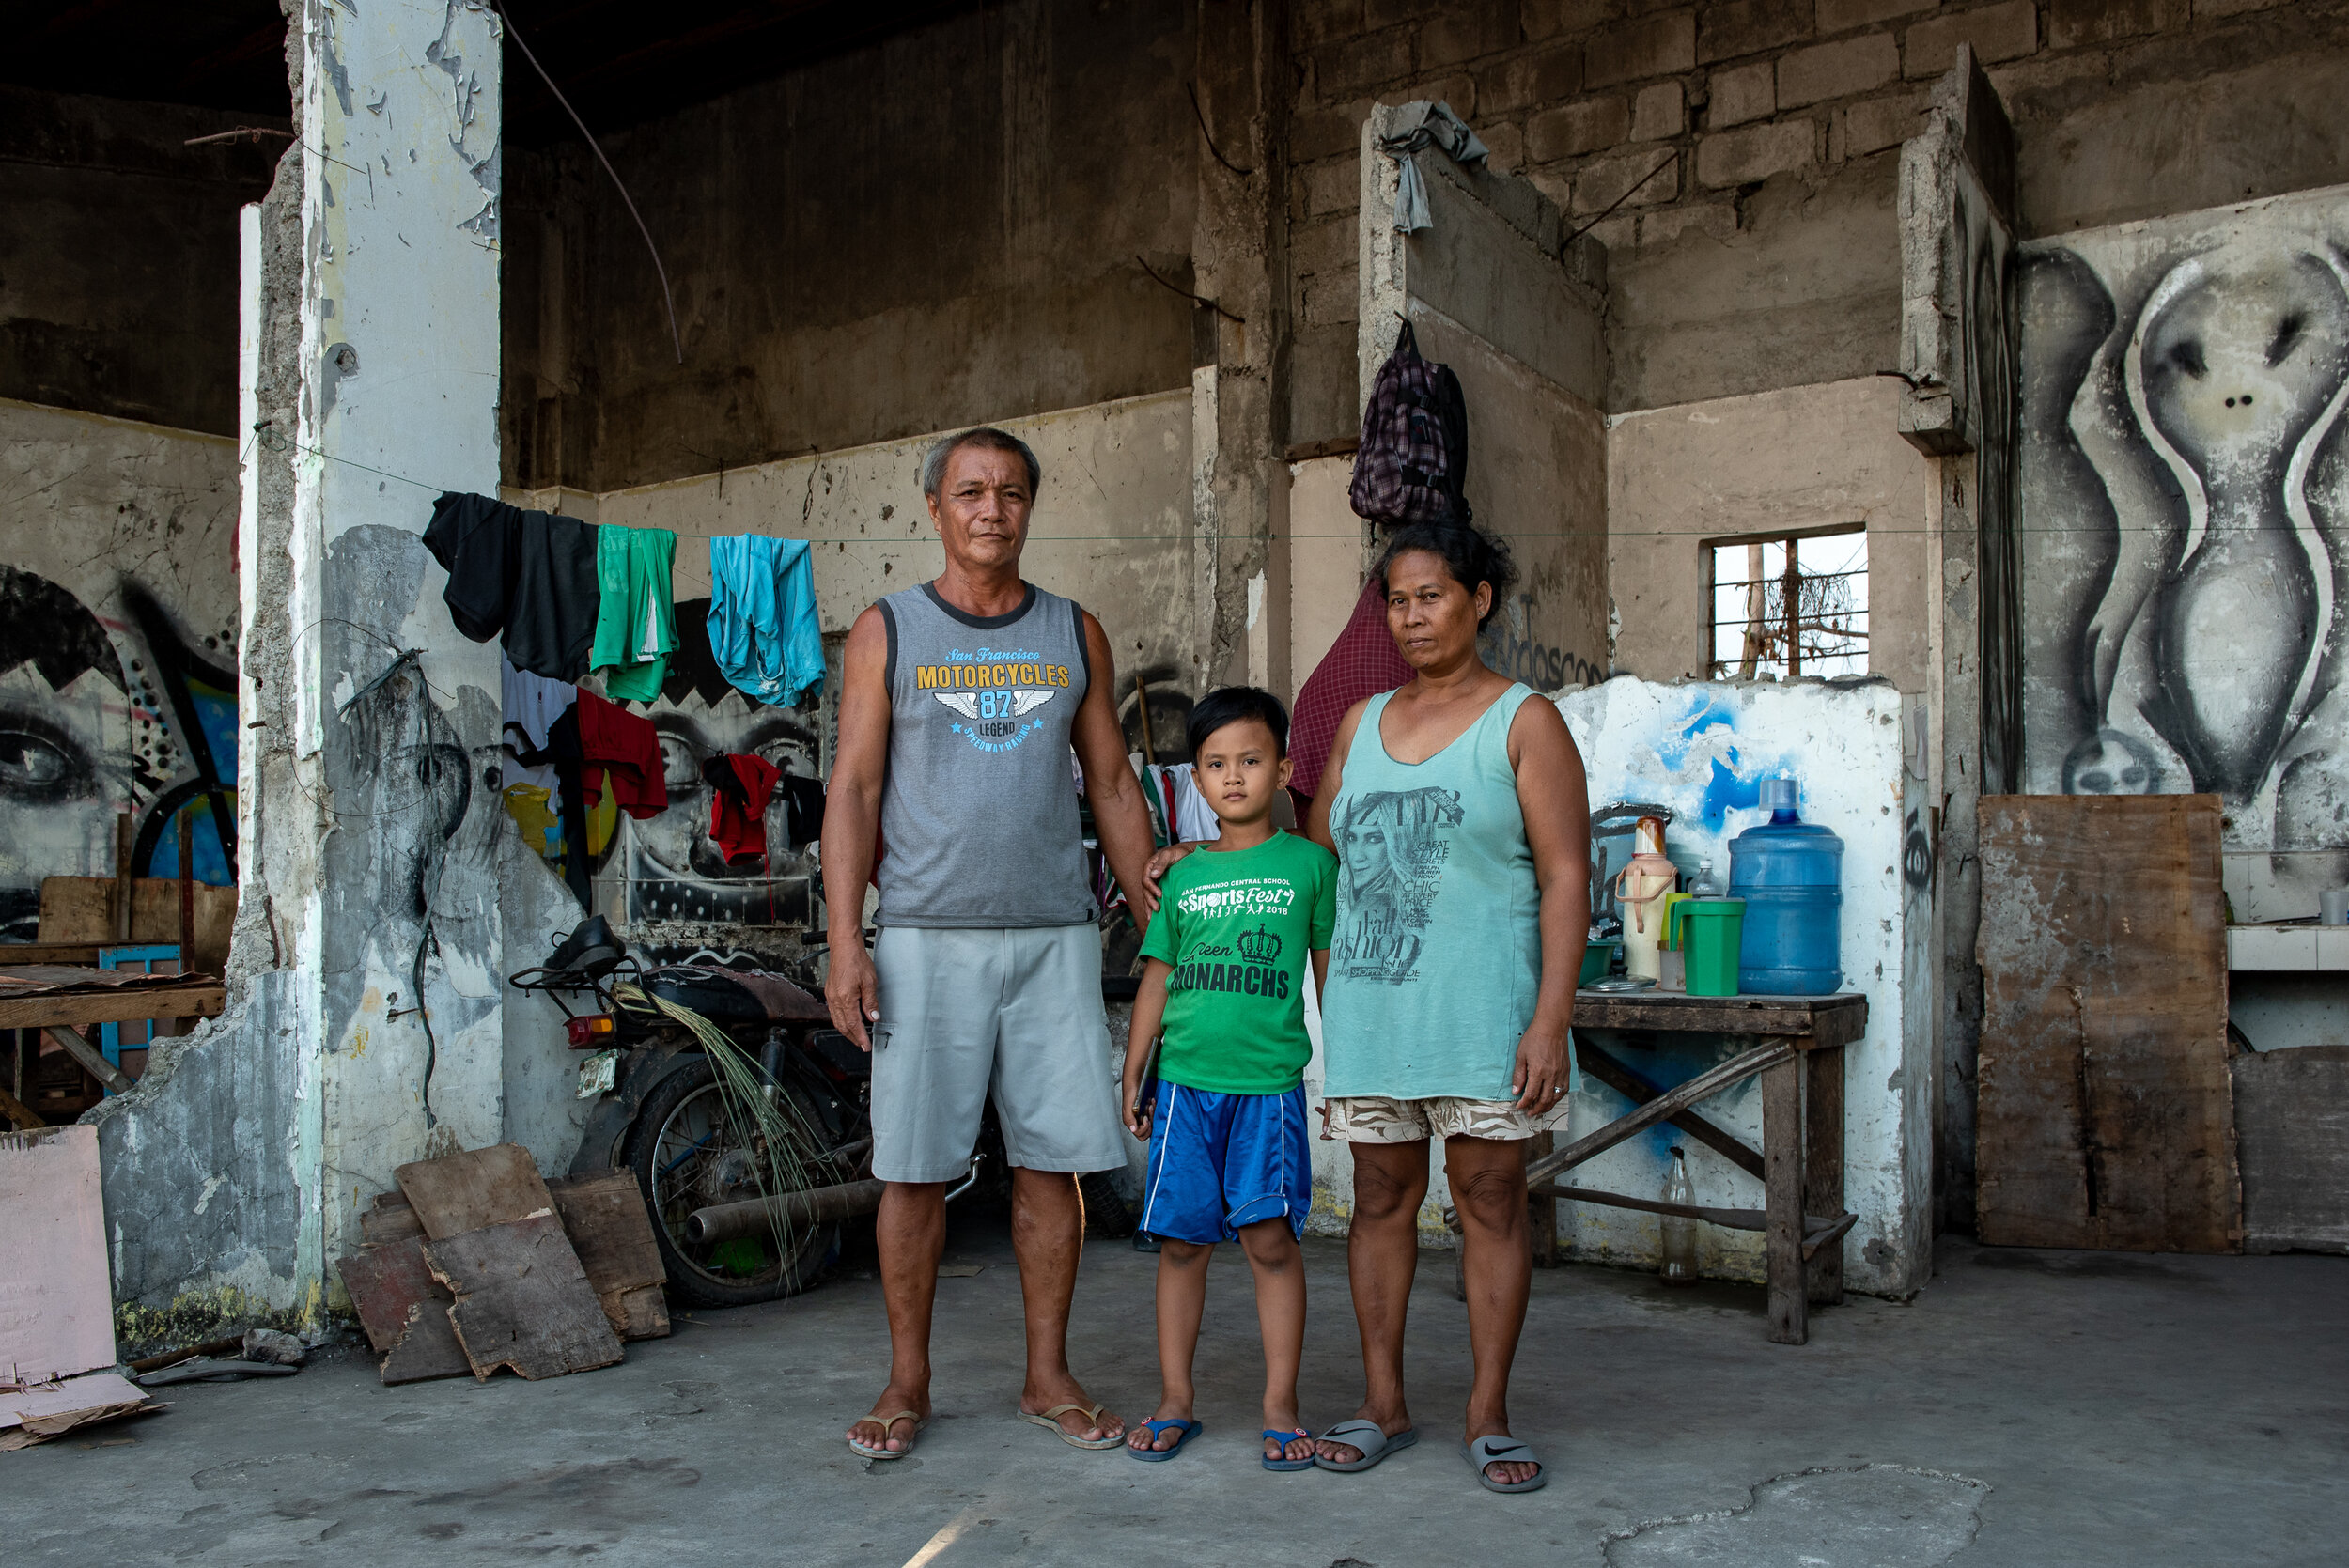  53 year old fisherman Gerry Diablo (left) along with his son EJ (center) and Risa (right) are one of the families that sought shelter in this empty graffiti-clad space along the coastal area of Real Street, Tacloban City. 